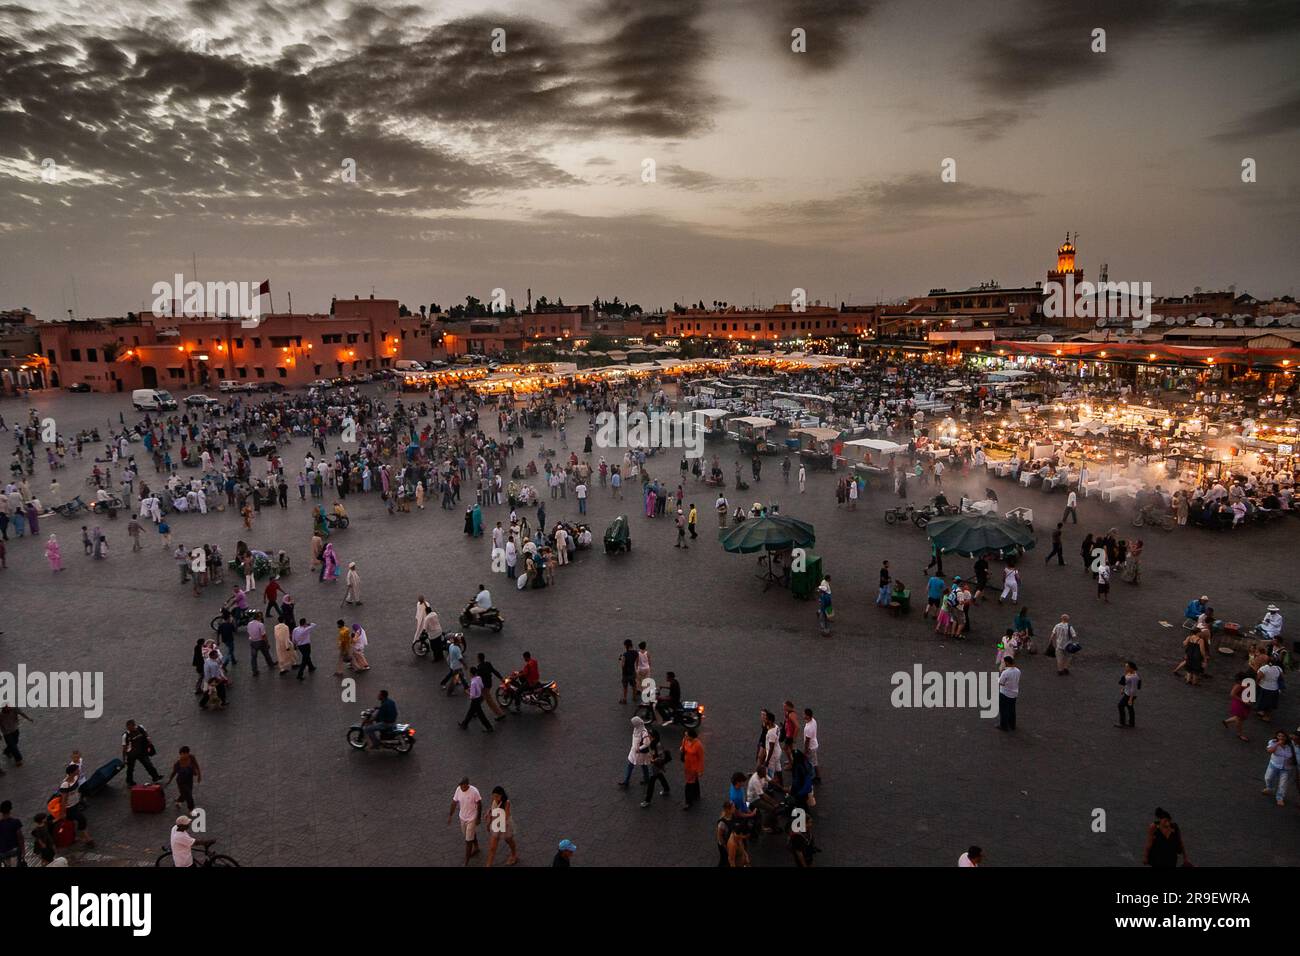 Jemaa el-Fna or Djemaa el Fna is the main and most famous square in the Moroccan city of Marrakesh. It is located in the historic part, the almedina, Stock Photo